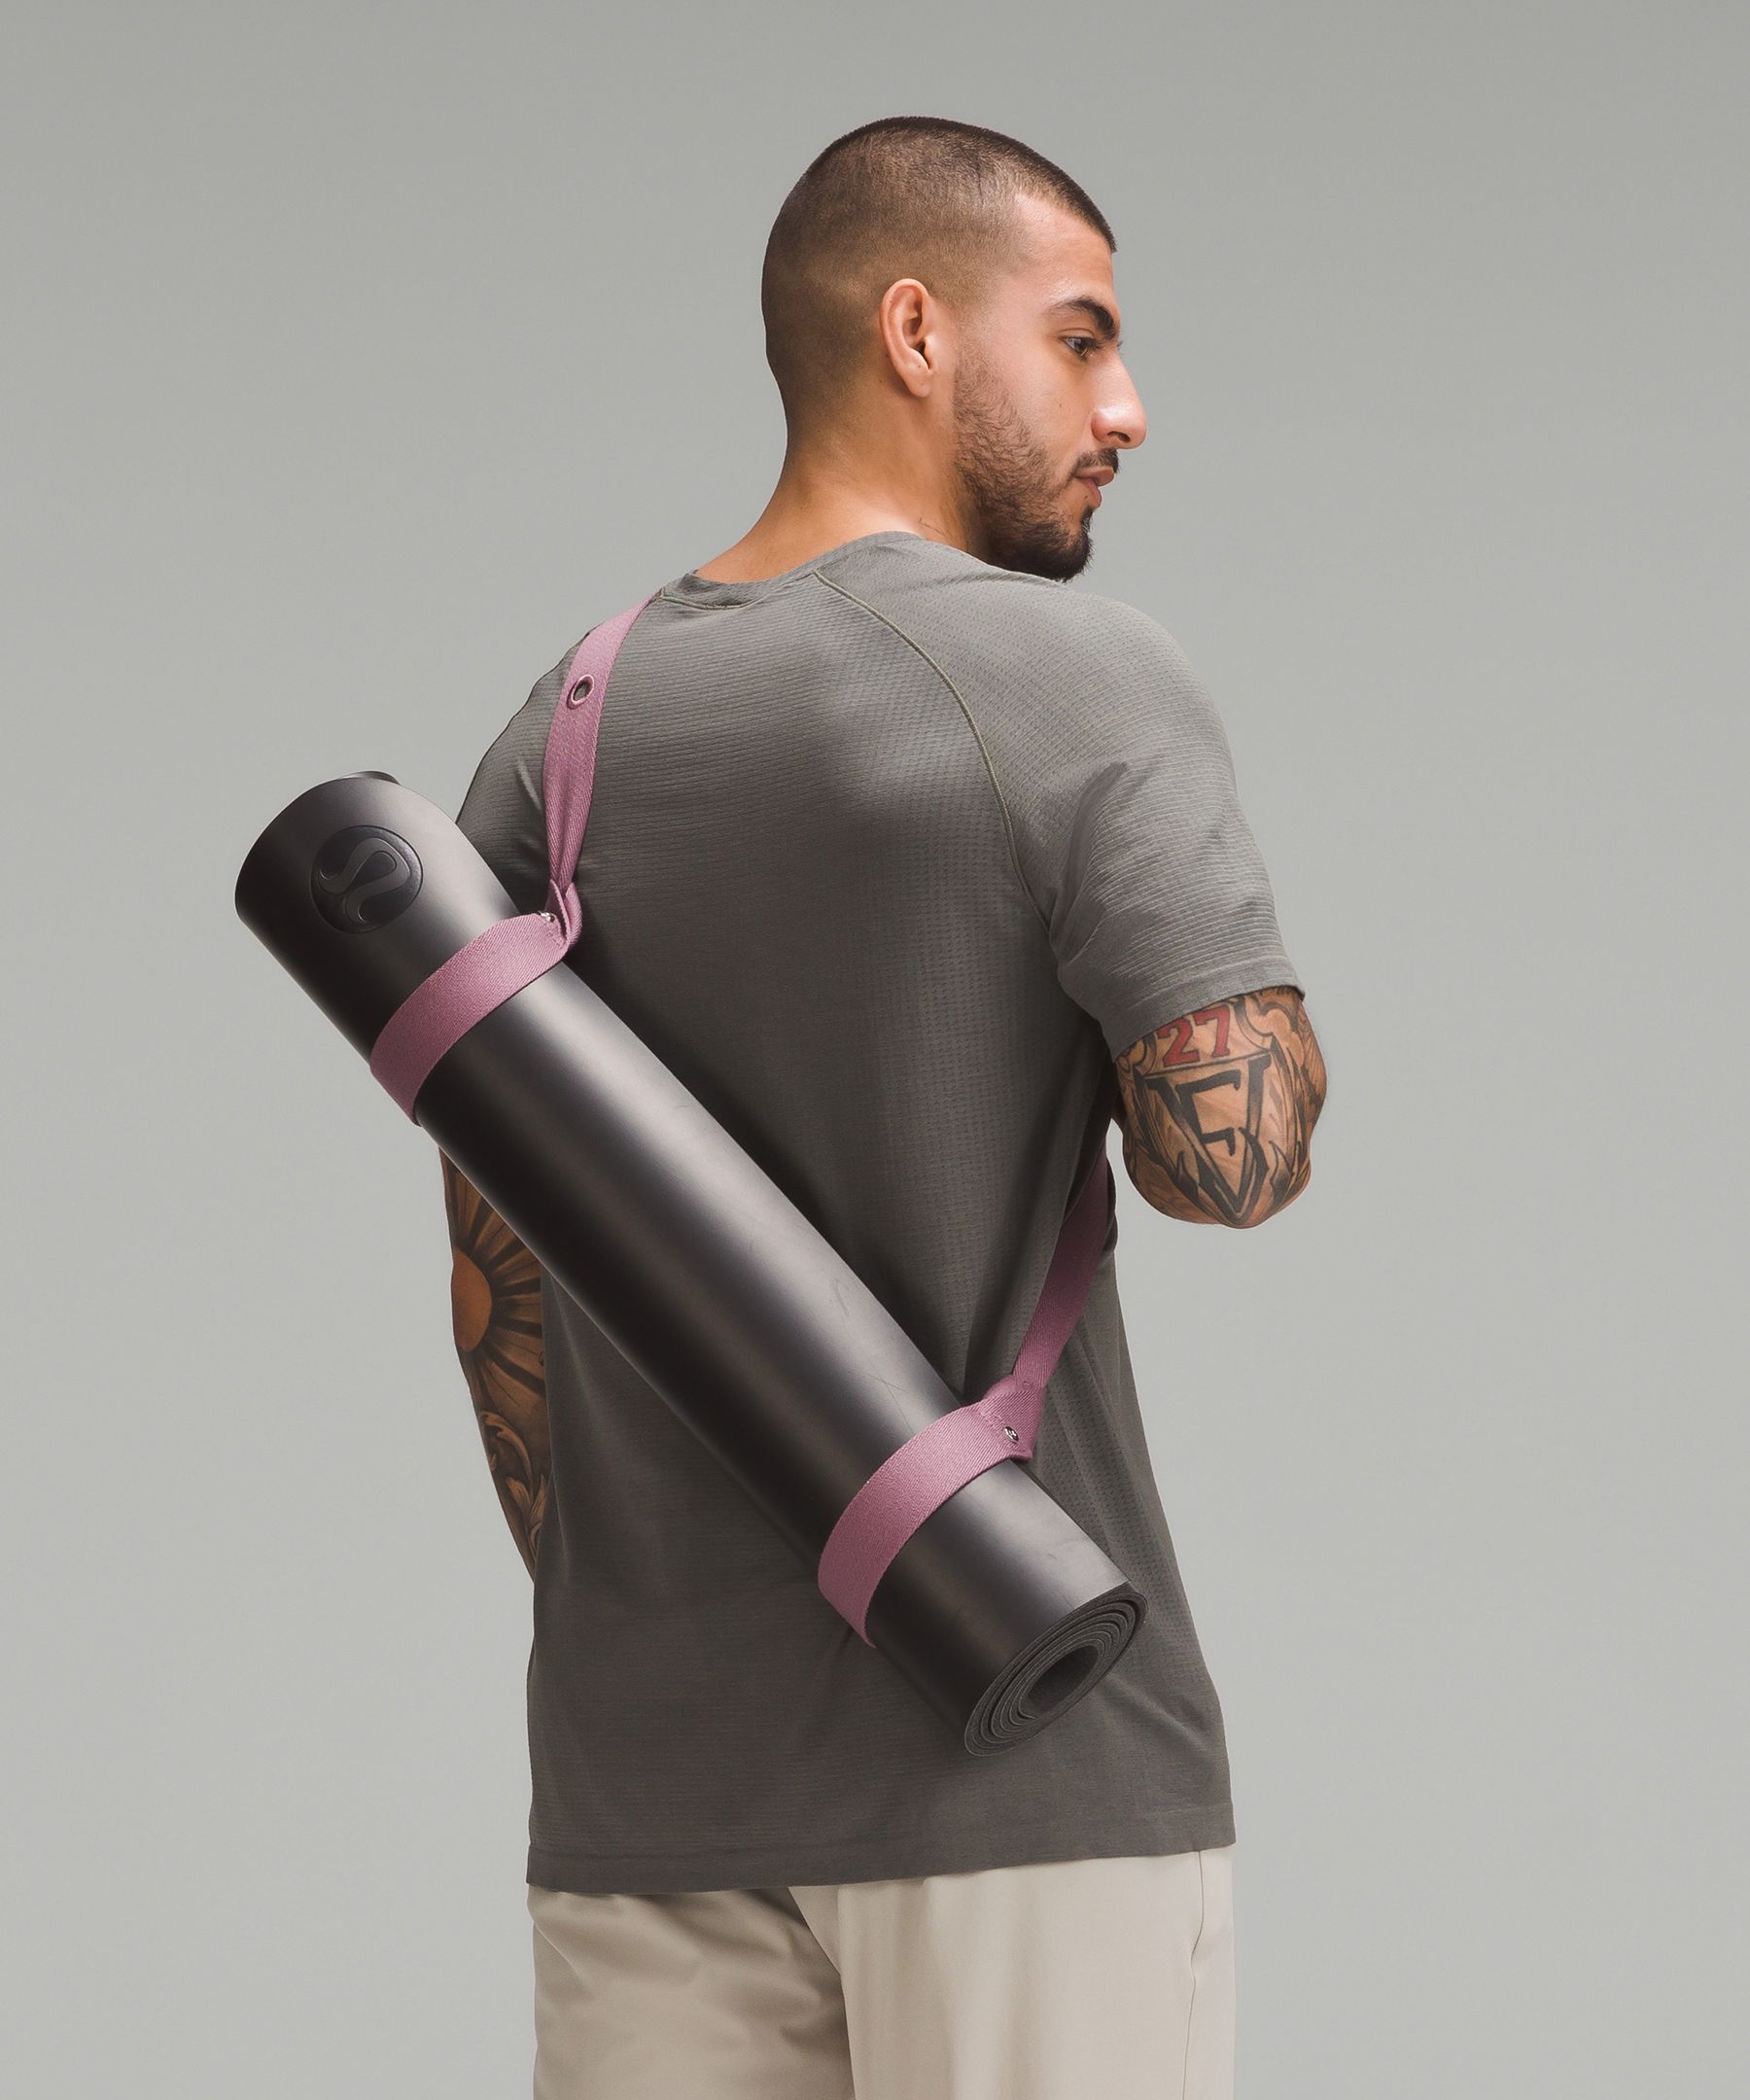 Loop It Up Mat Strap, Unisex Work Out Accessories